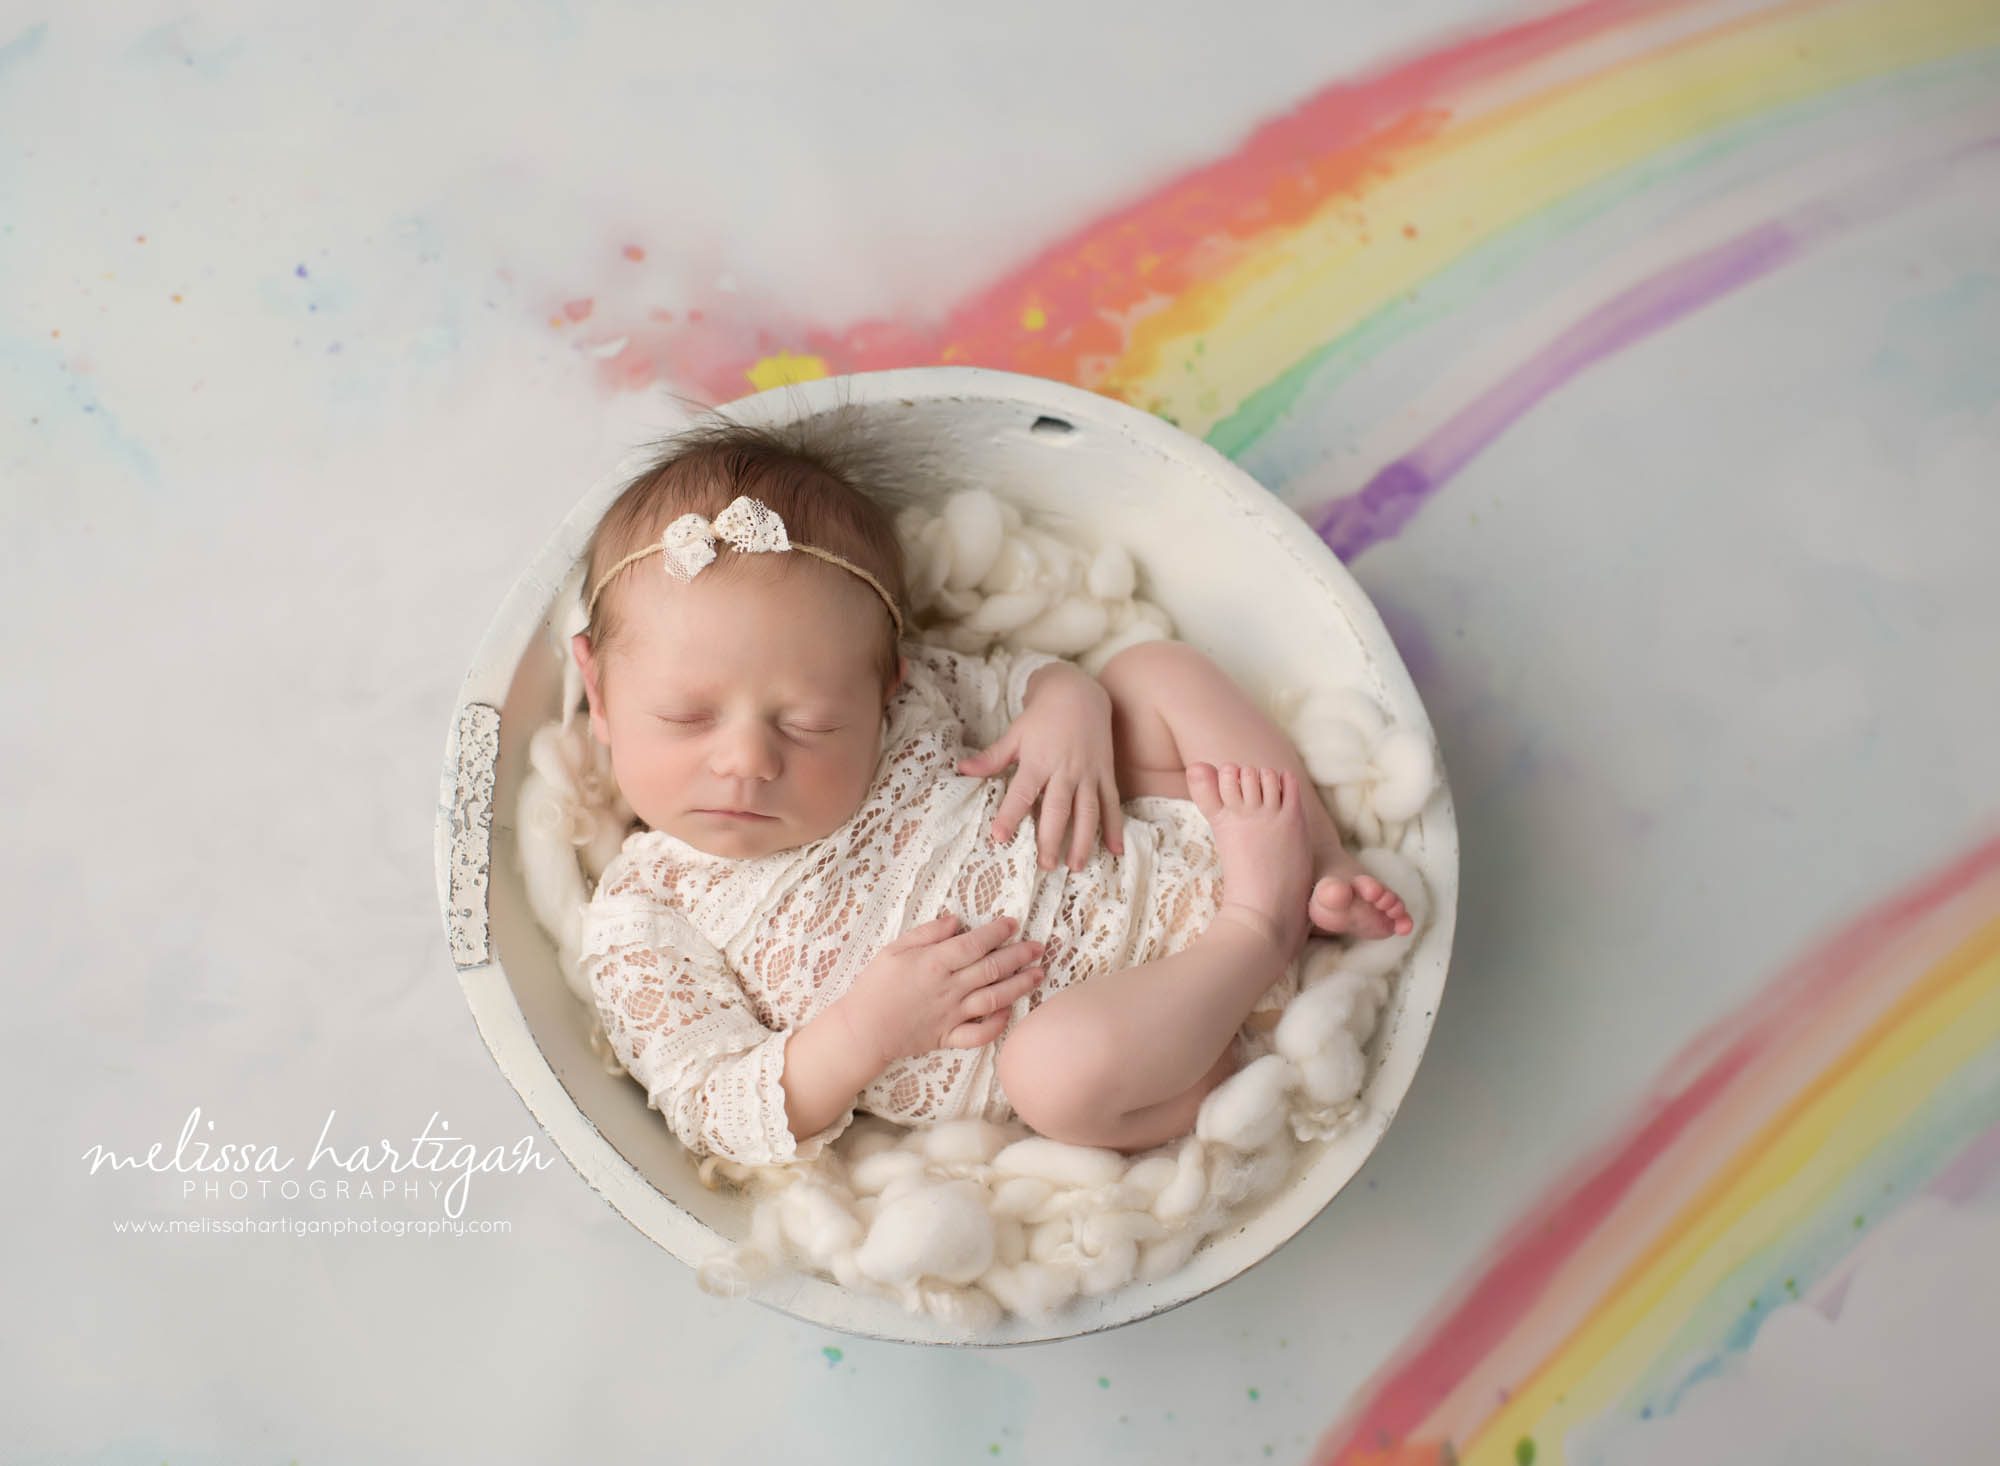 rainbow baby newborn set up with pastel water rainbow watercolors baby girl posed in wooden bowl